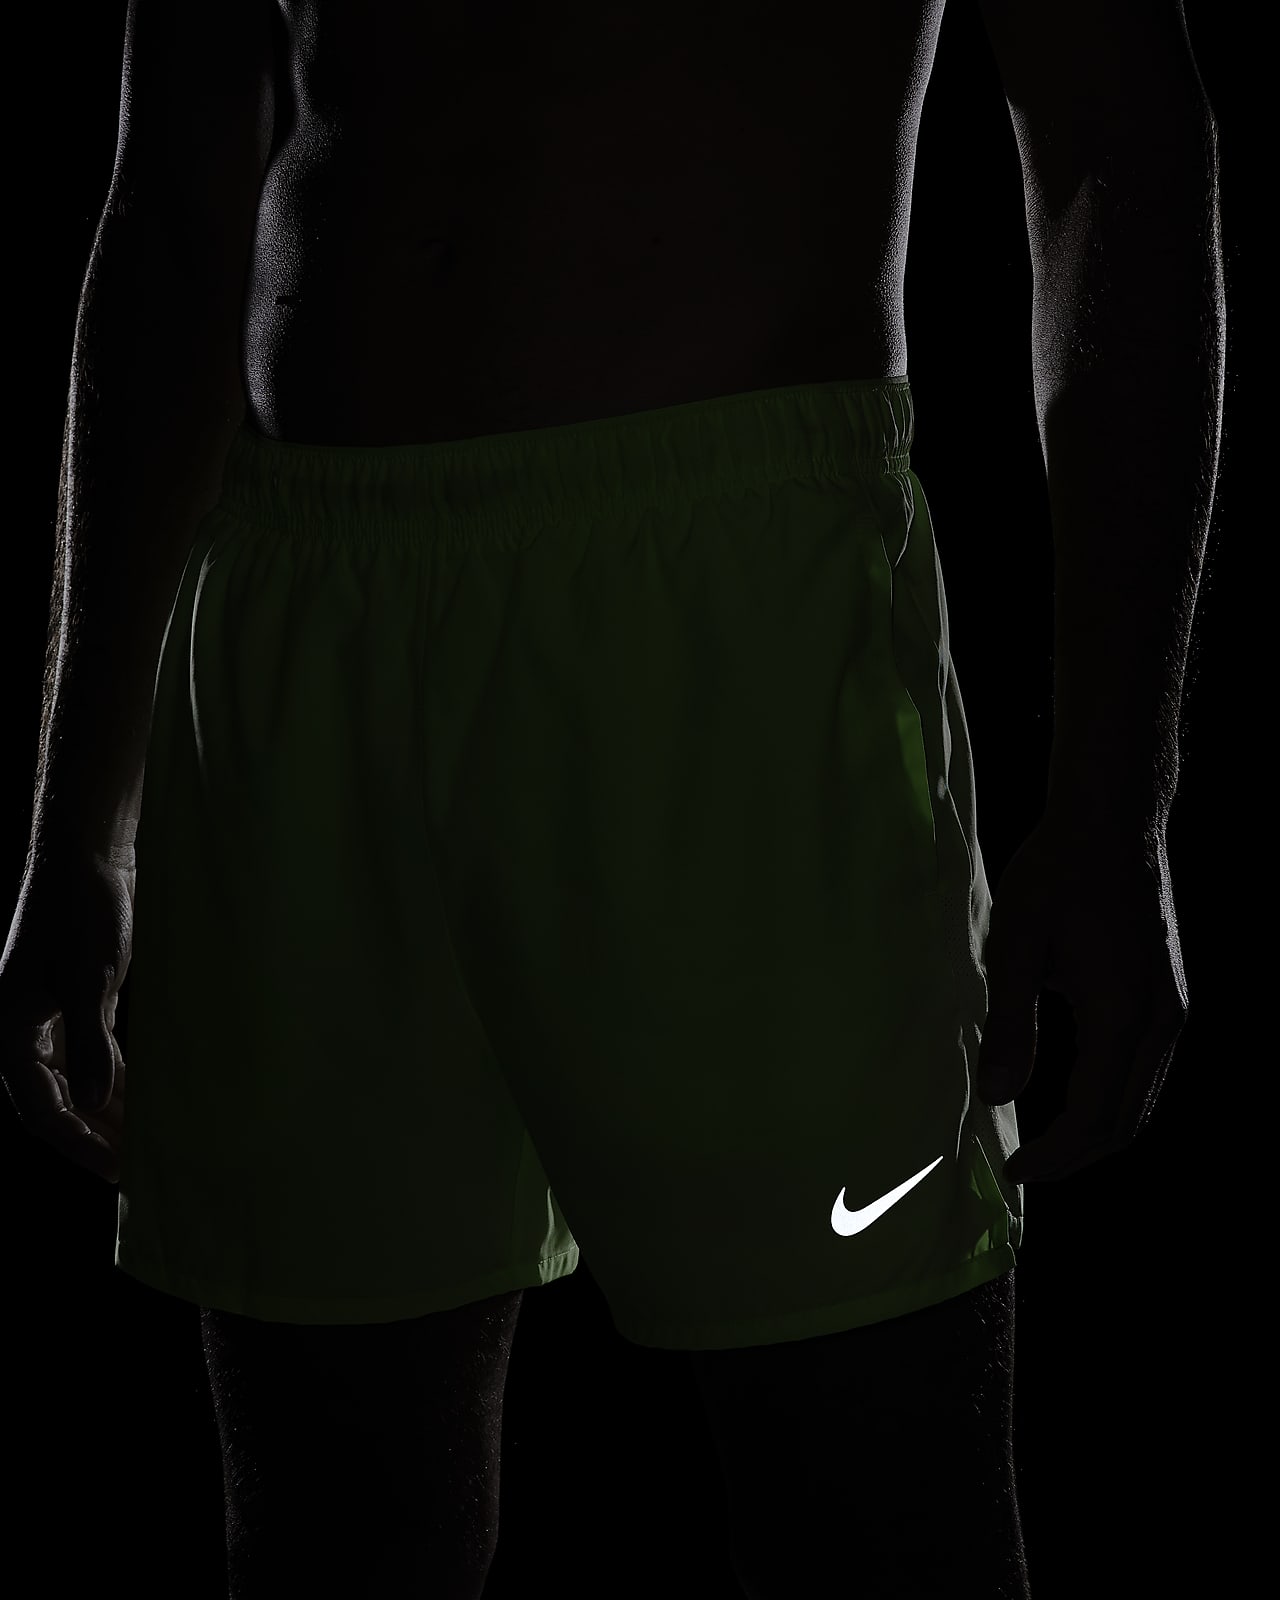 Nike Short Running Hombre Dri-Fit Challenger Brief-Lined negro